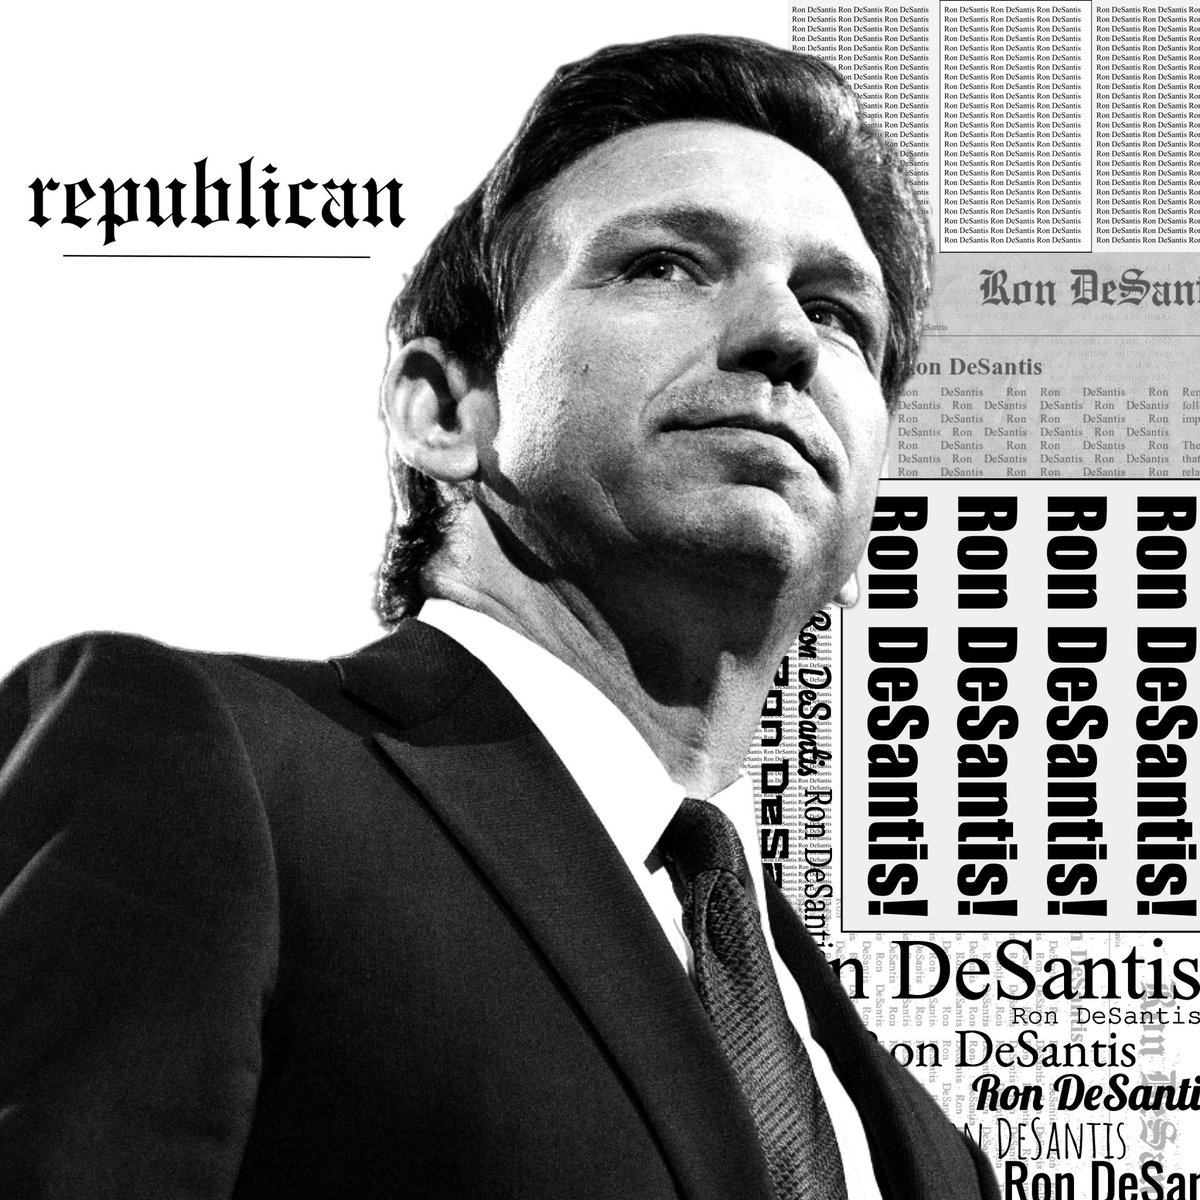 Newsflash!

There is NO SCENARIO where #DeSantis2024 drops out of the race. 

#DeSavages #NeverQuit #InItToWinIt